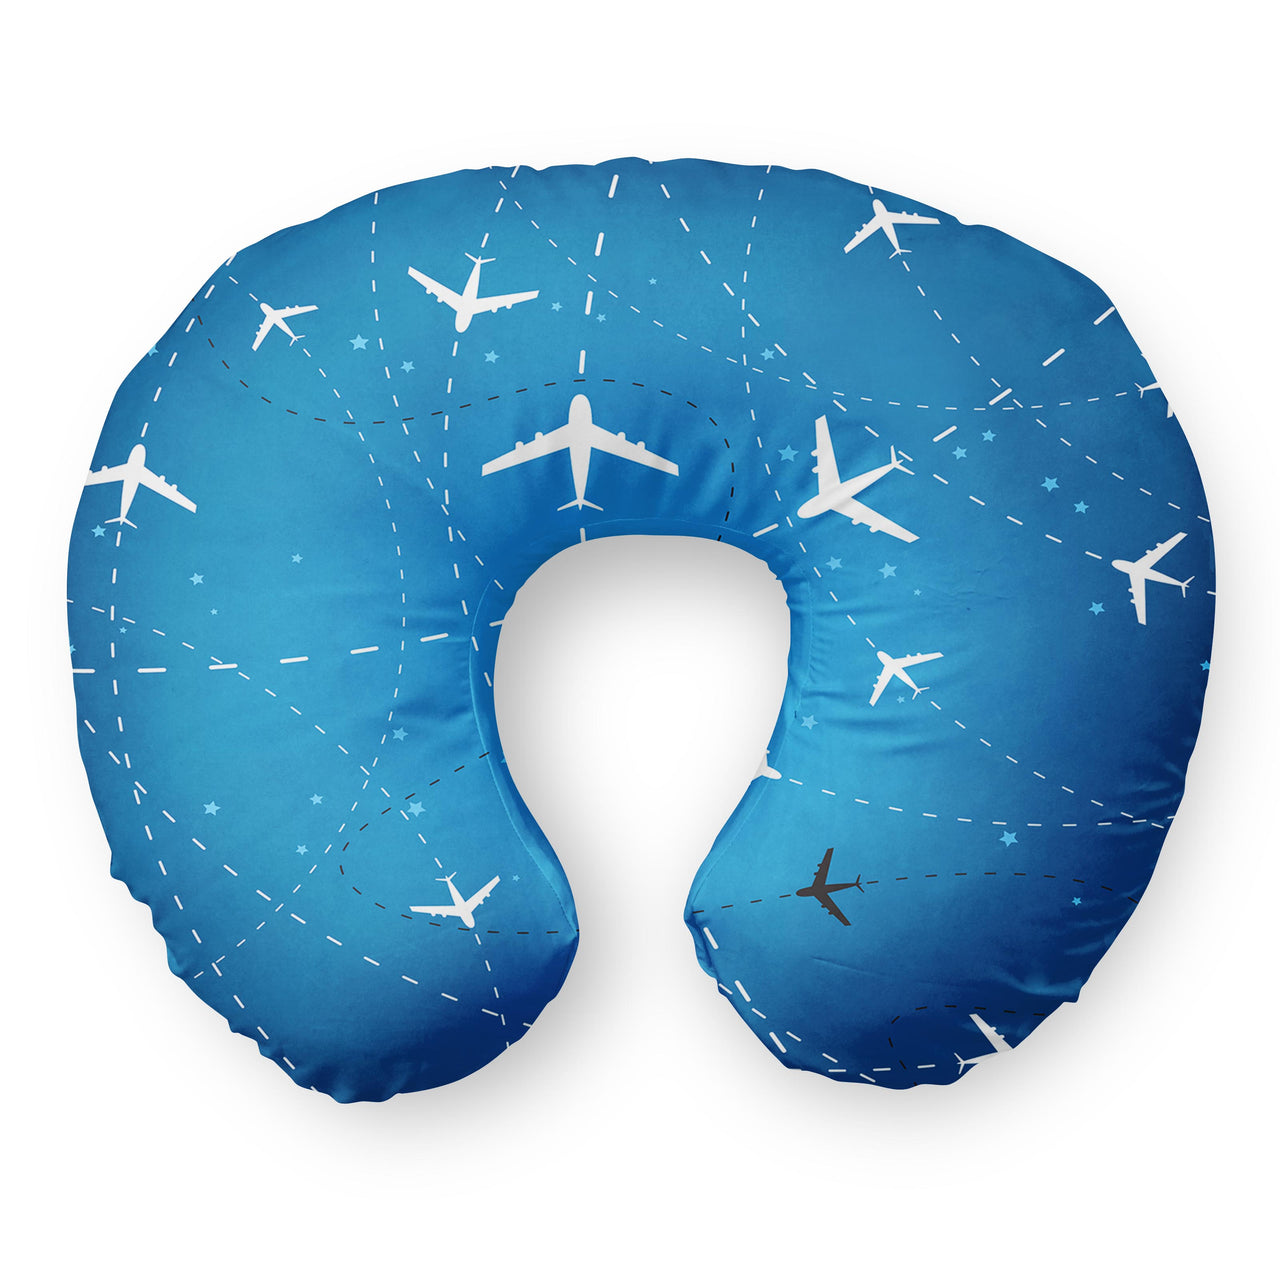 Travelling with Aircraft Travel & Boppy Pillows